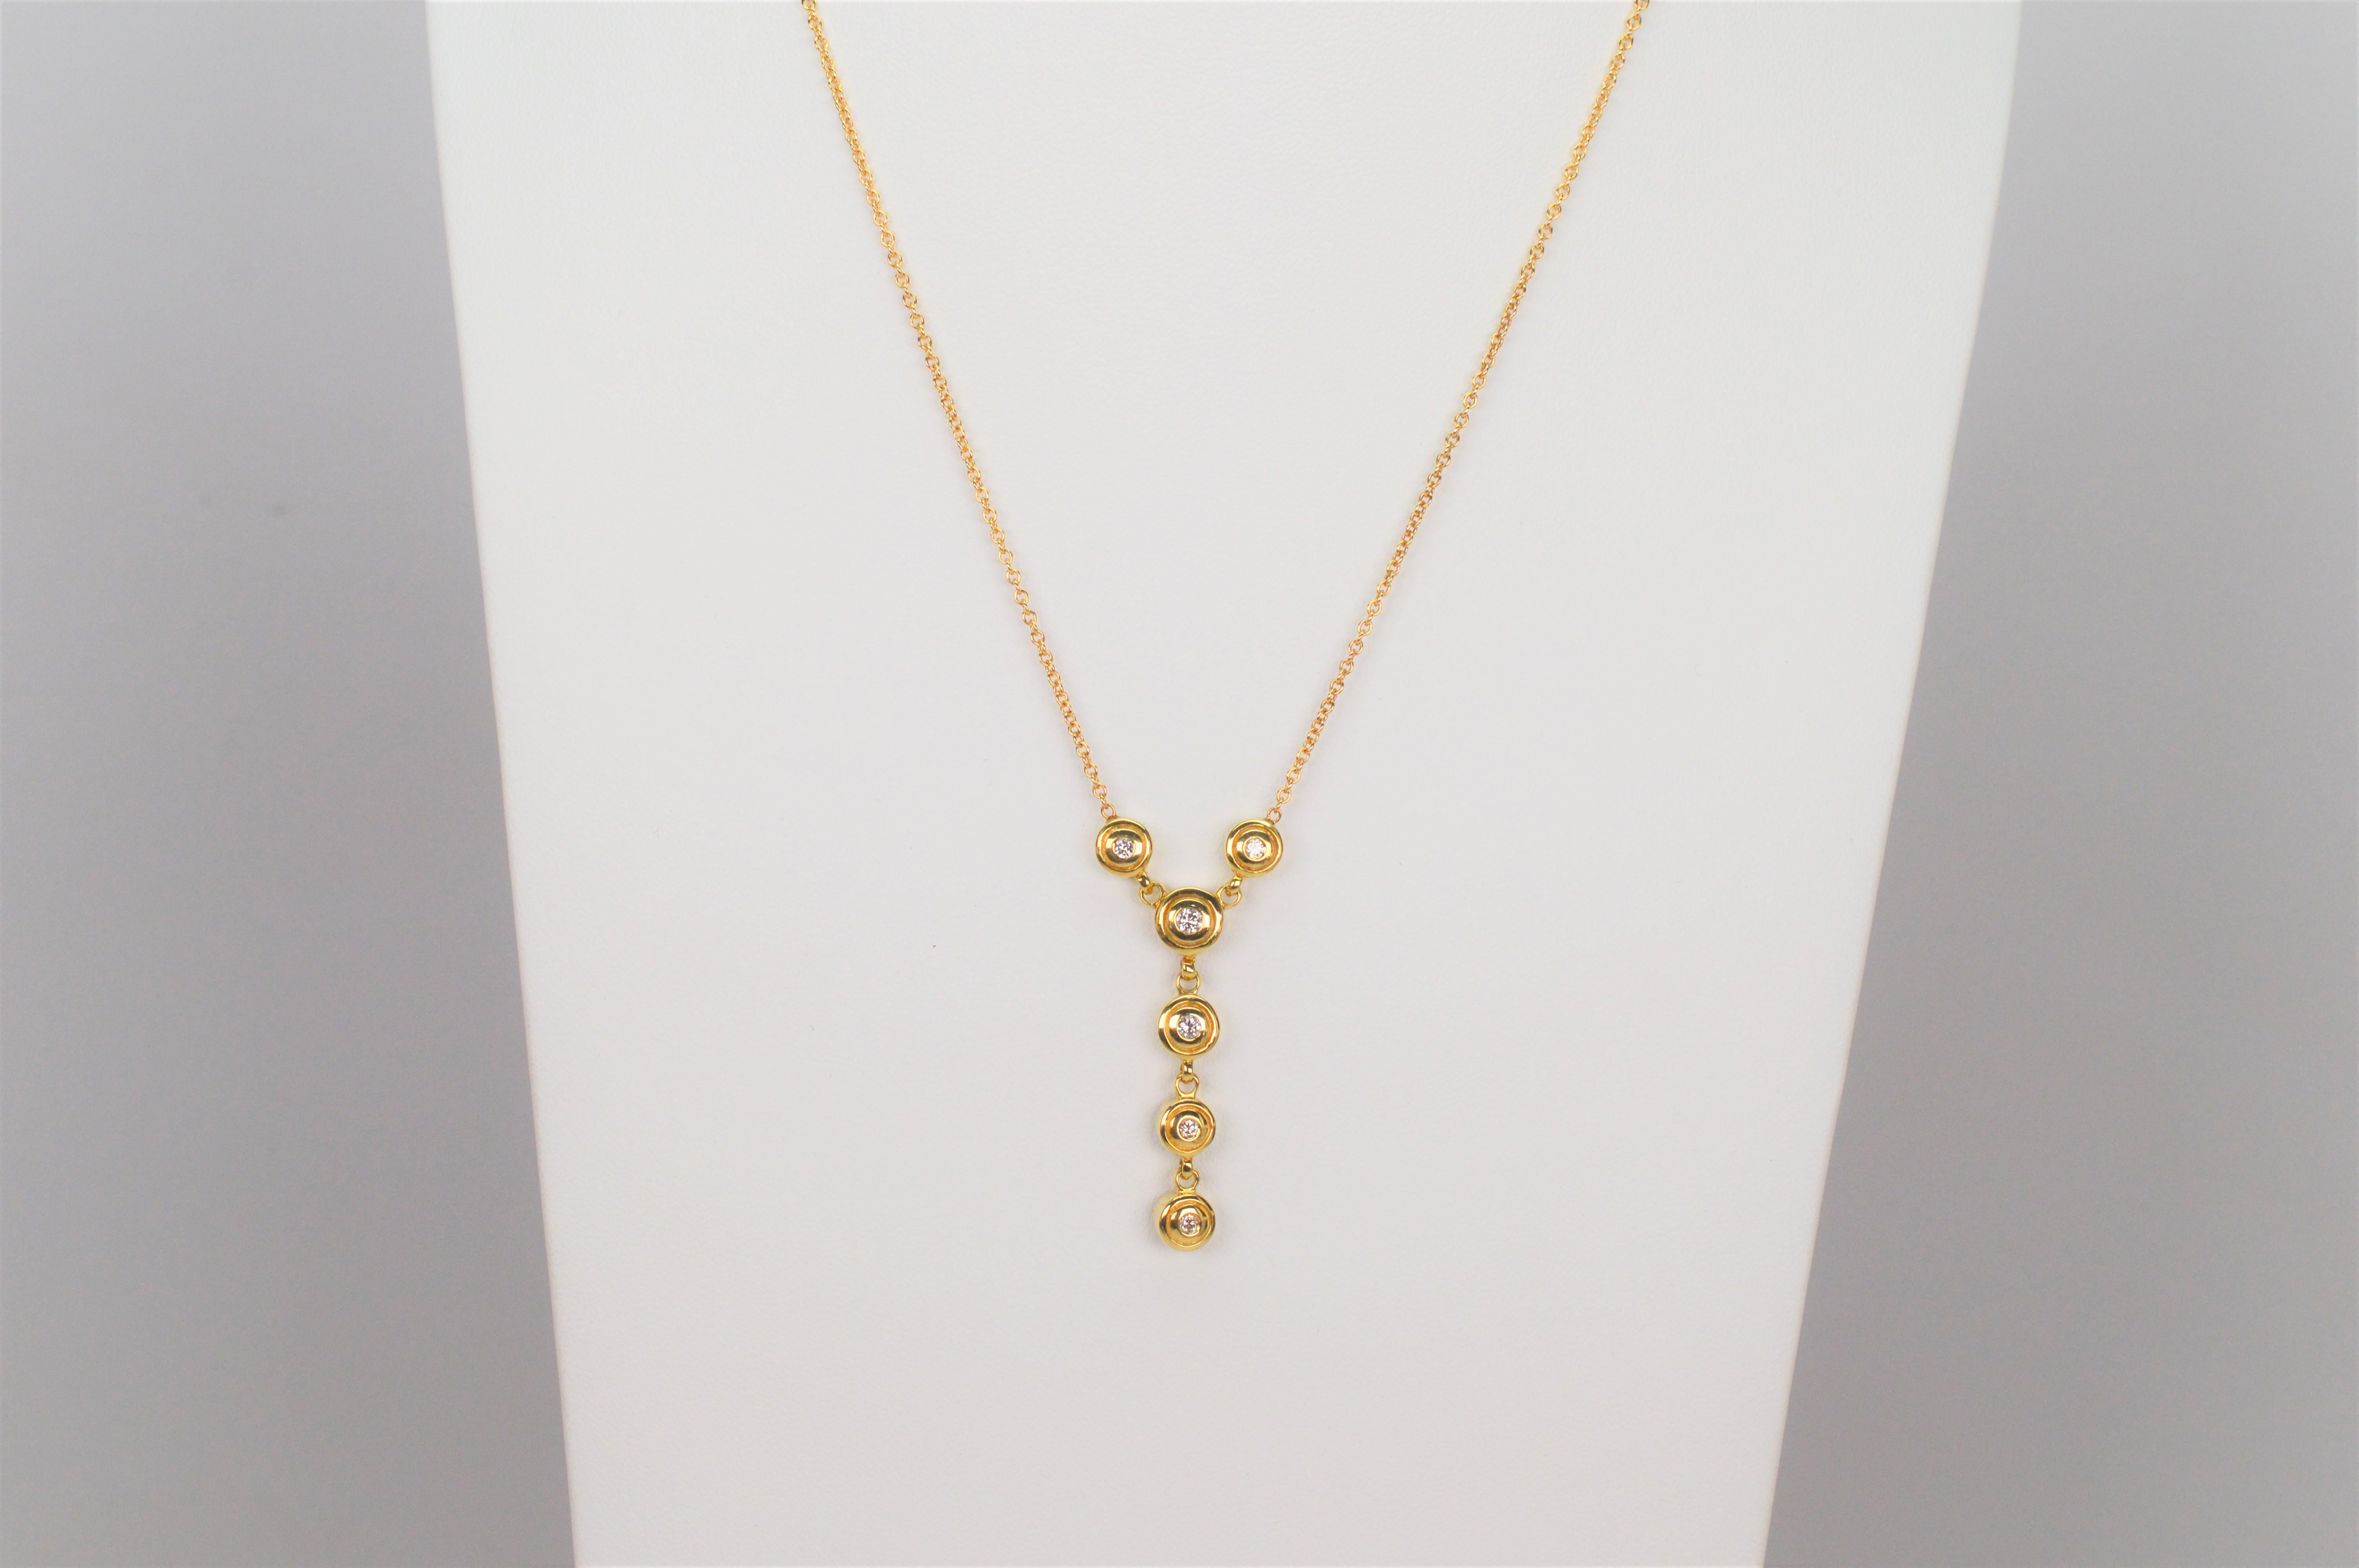 Six Diamond 14 Karat Yellow Gold Drop Pendant Necklace In Excellent Condition For Sale In Mount Kisco, NY